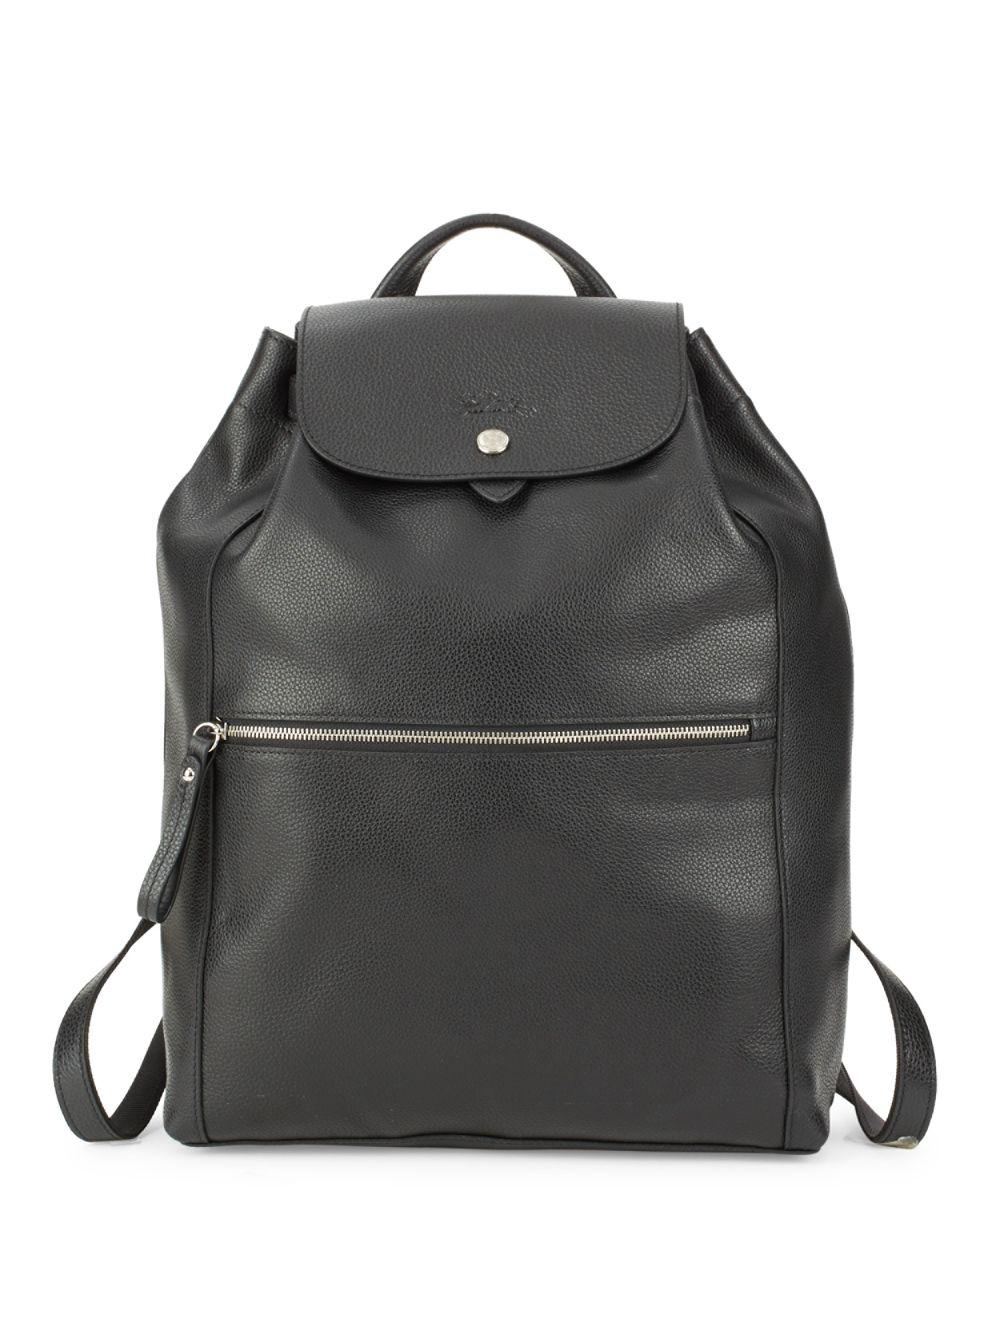 Longchamp Leather Le Foulonne Backpack in Black - Lyst